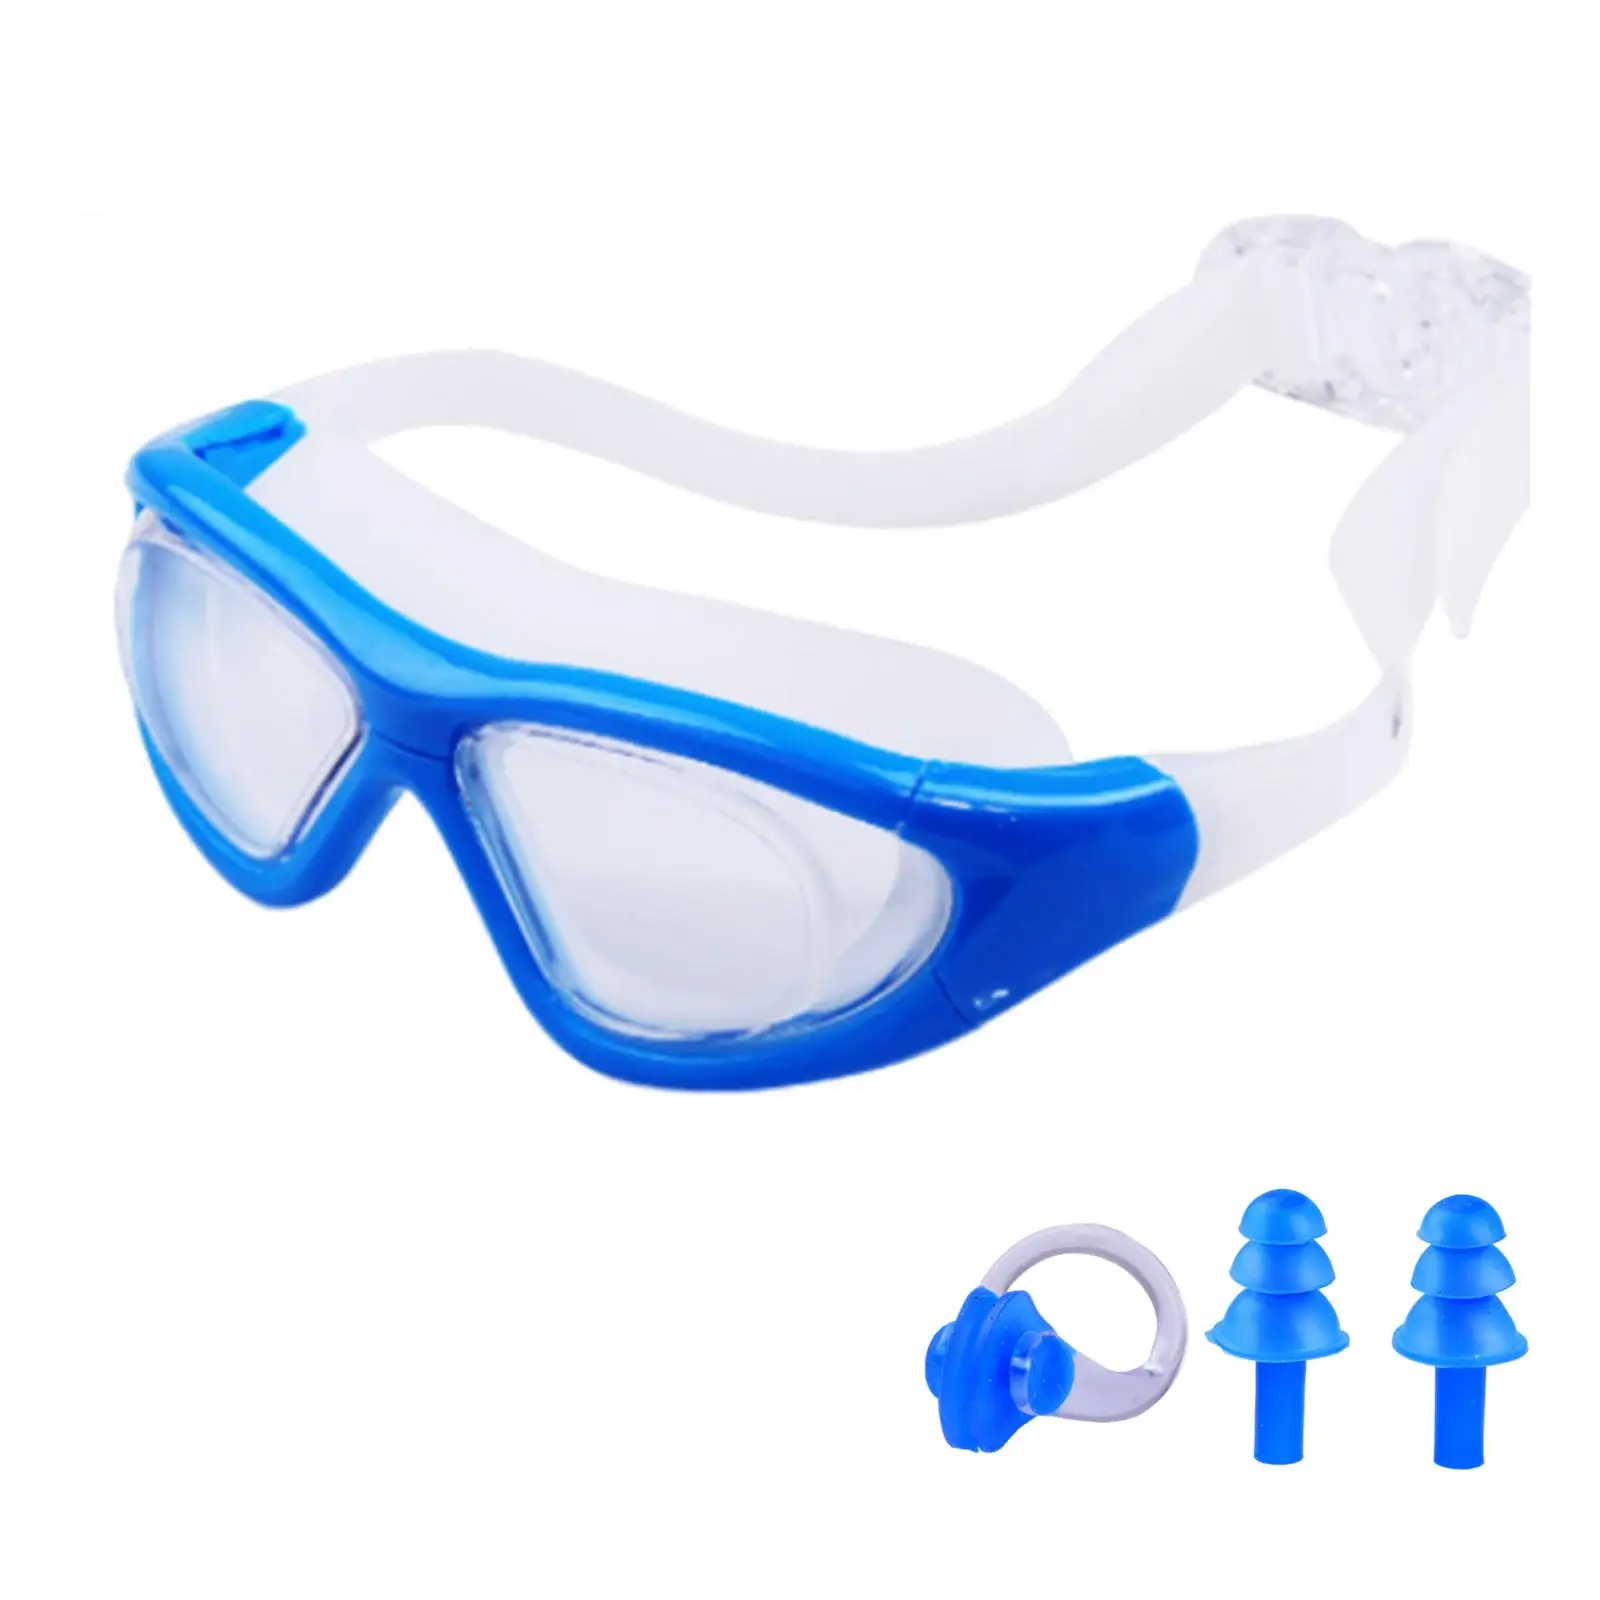 Swimming Goggles Wide View Adjustable Band with Storage Case Clear Vision Swim Goggles Diving Googles for Unisex Women Men